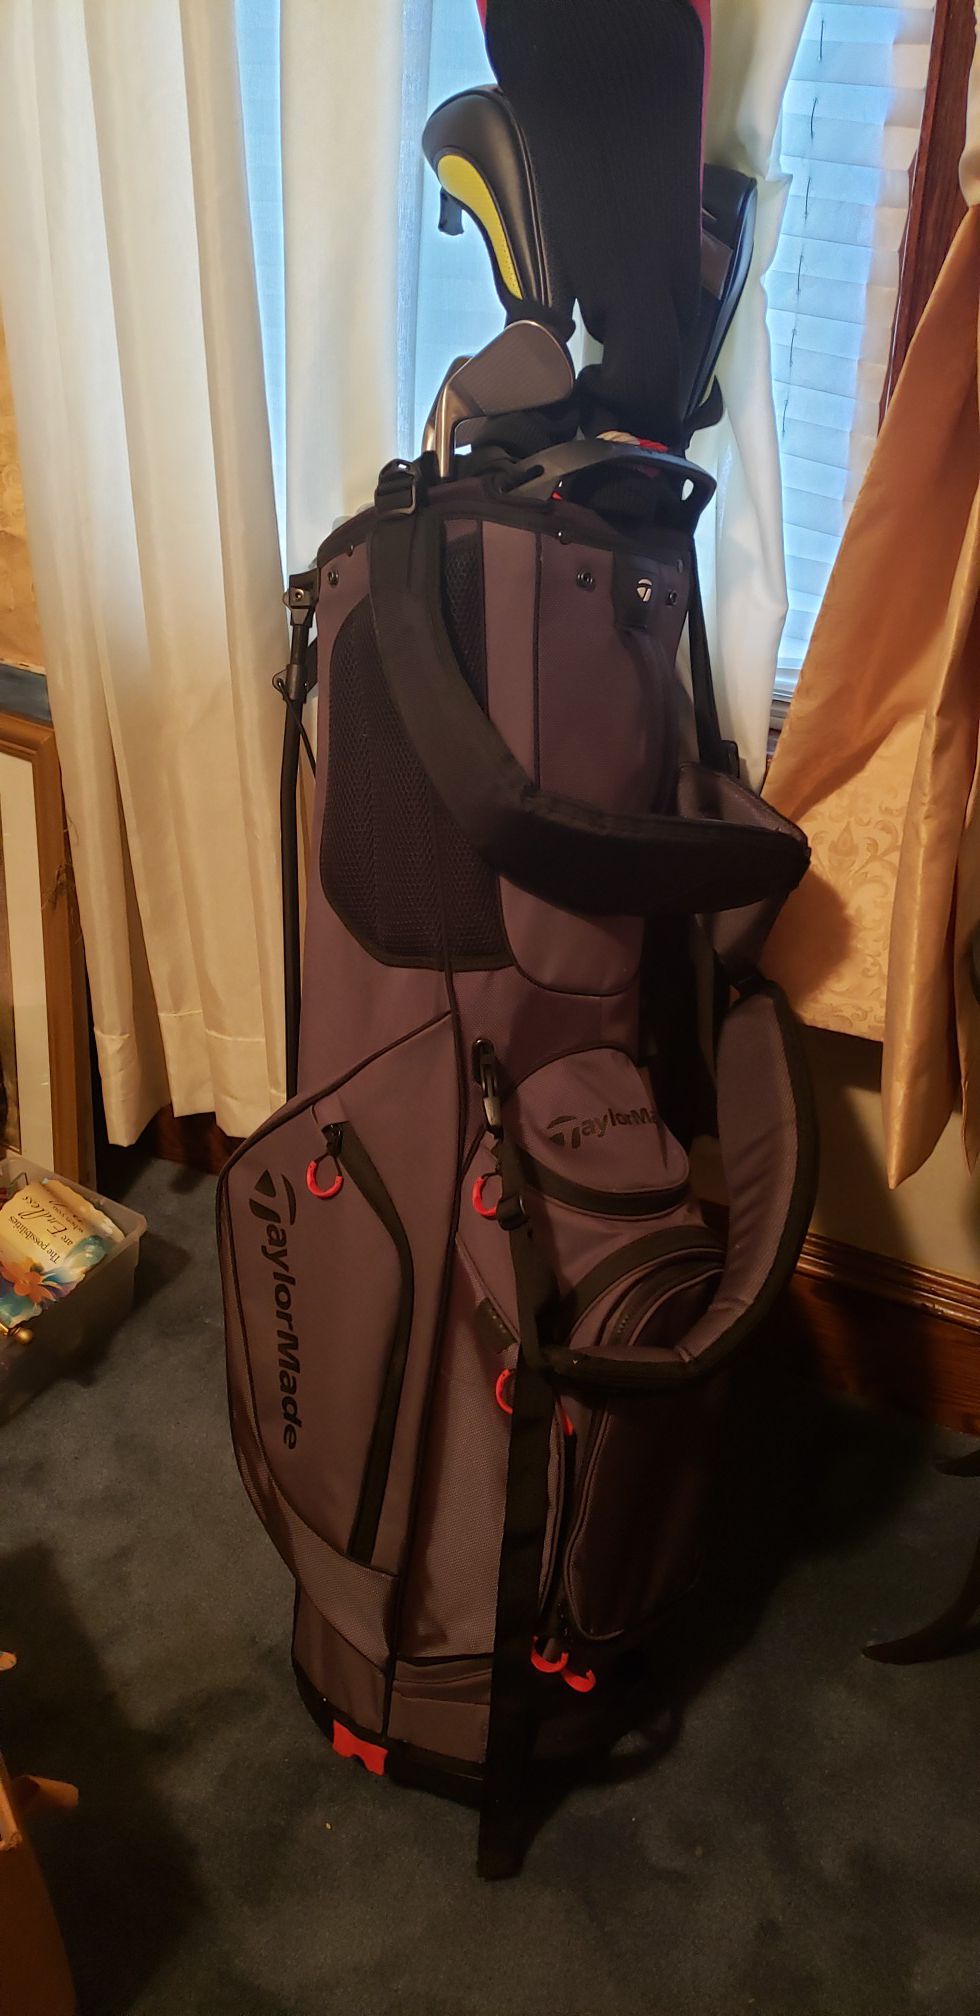 Golf bag, clubs with covers